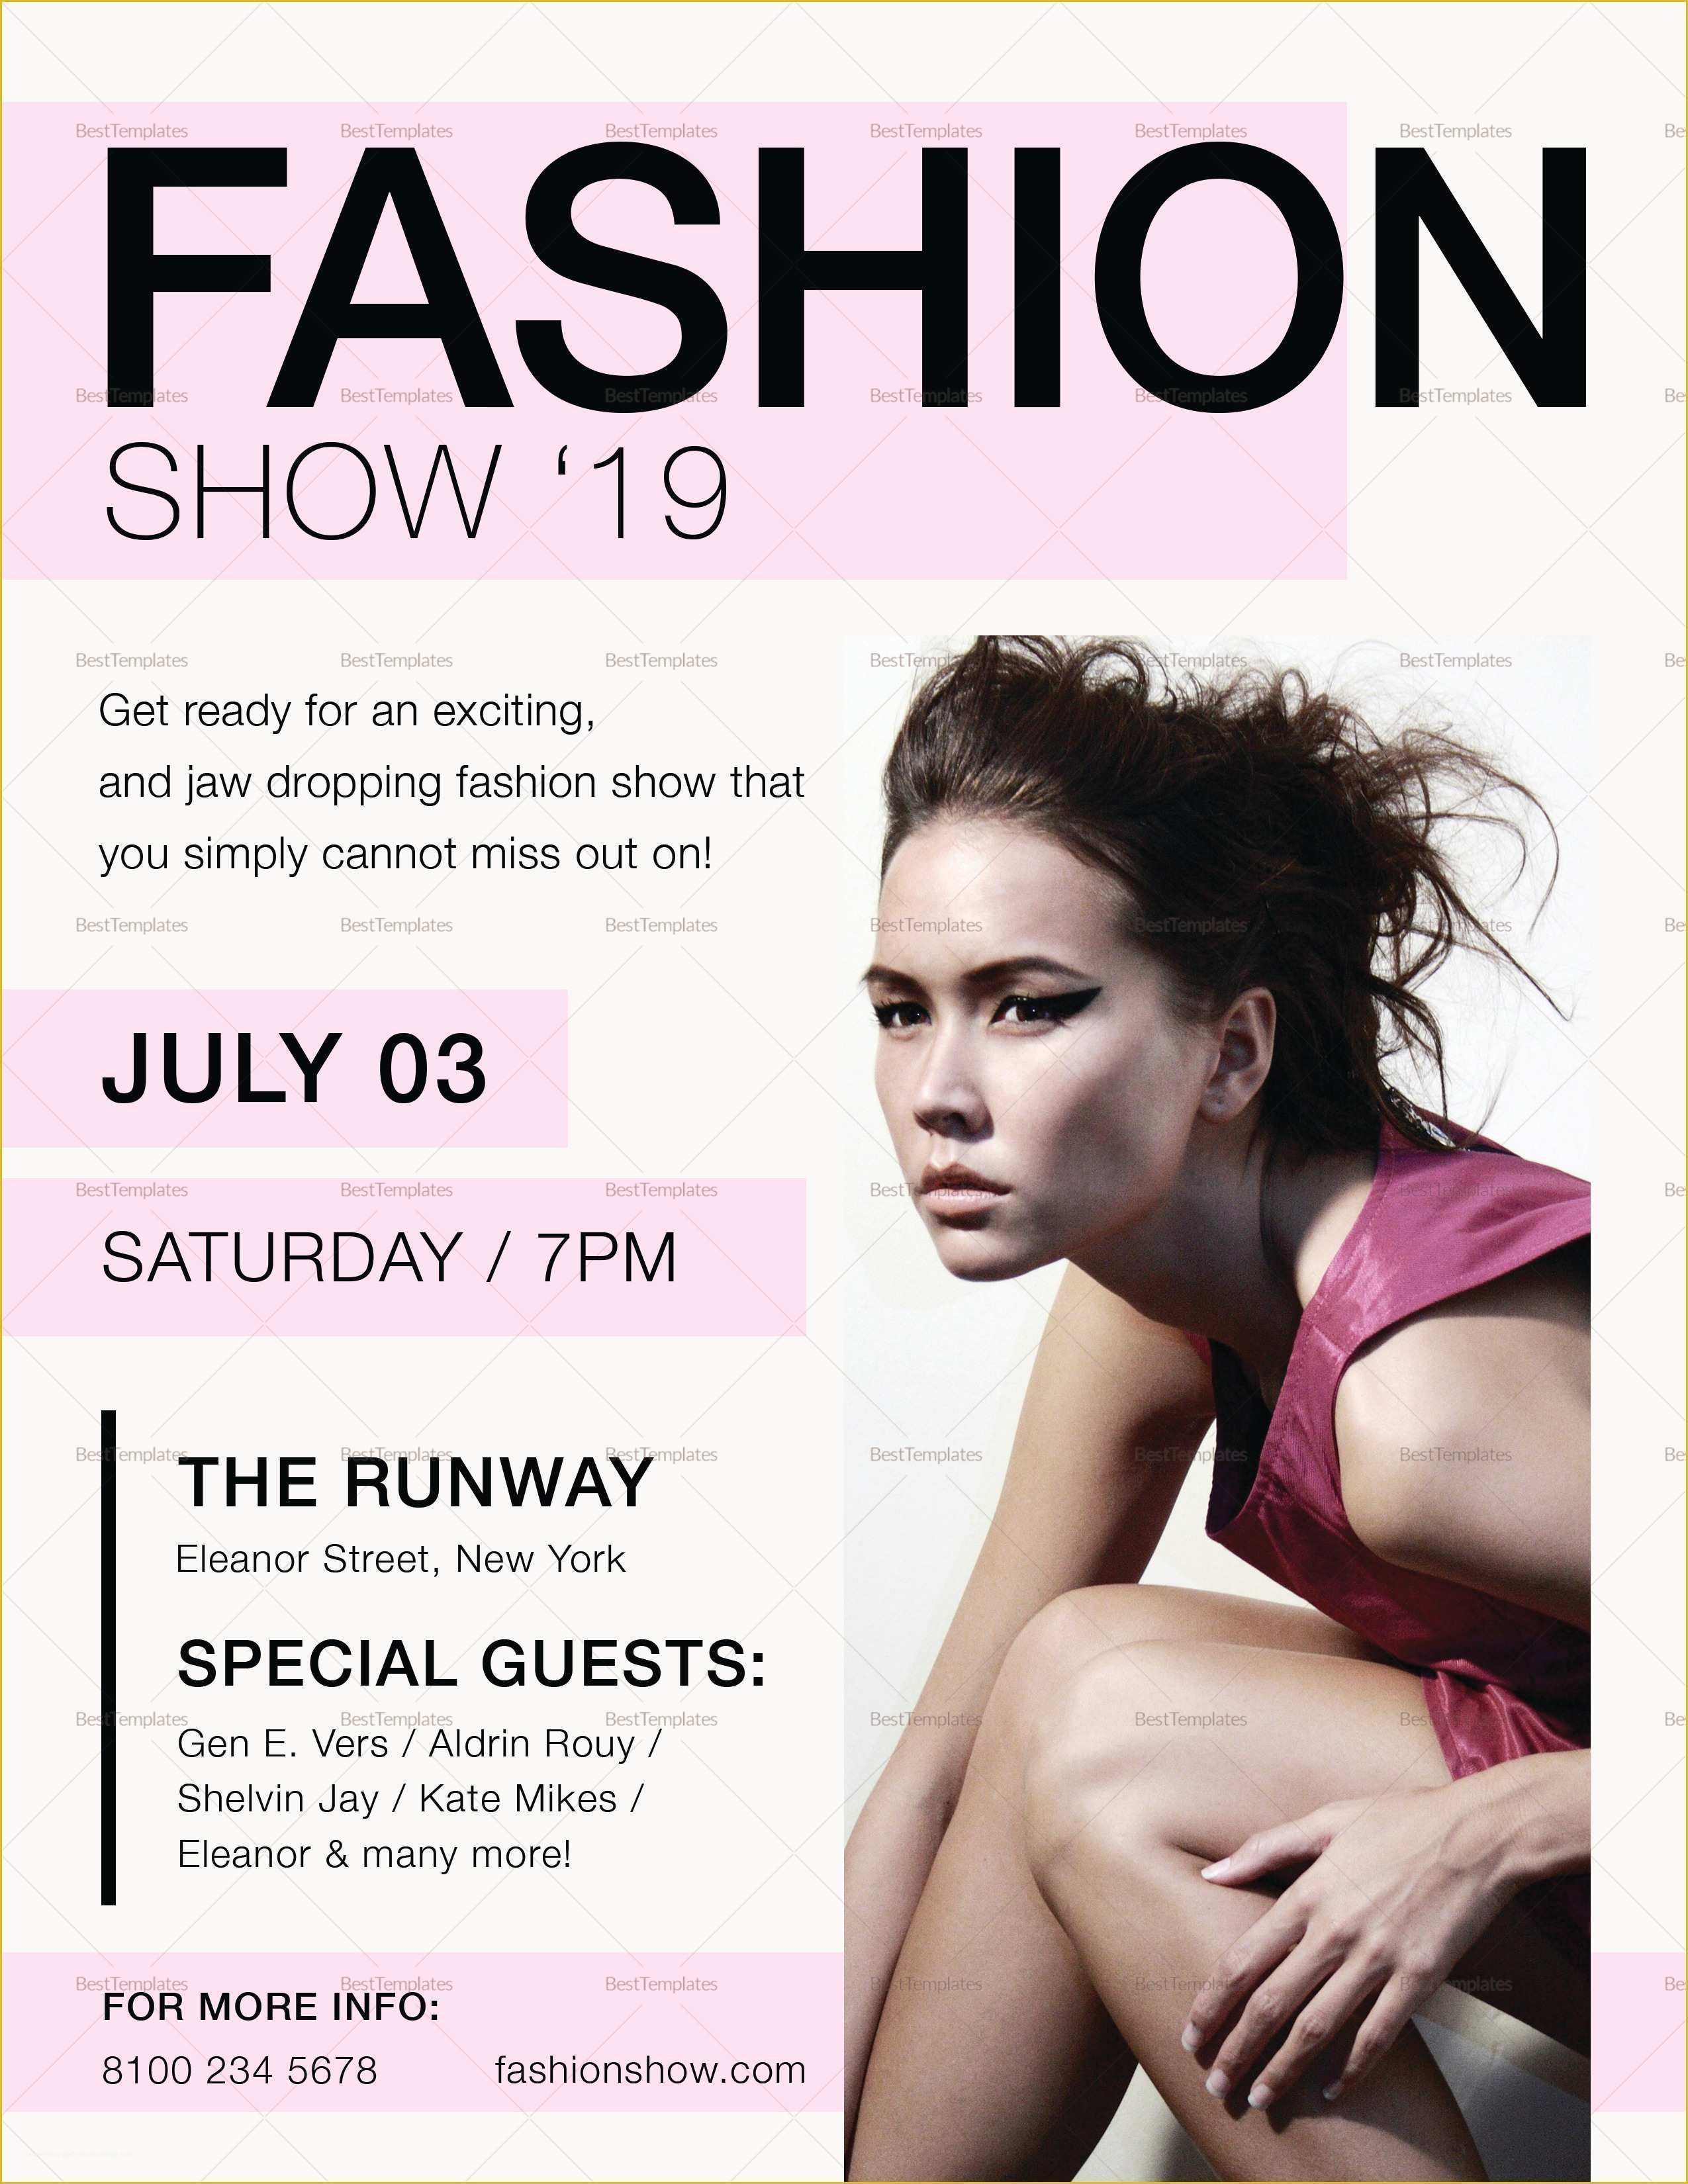 Free Fashion Show Flyer Template Of Fashion Show Flyer Design Template In Psd Word Publisher